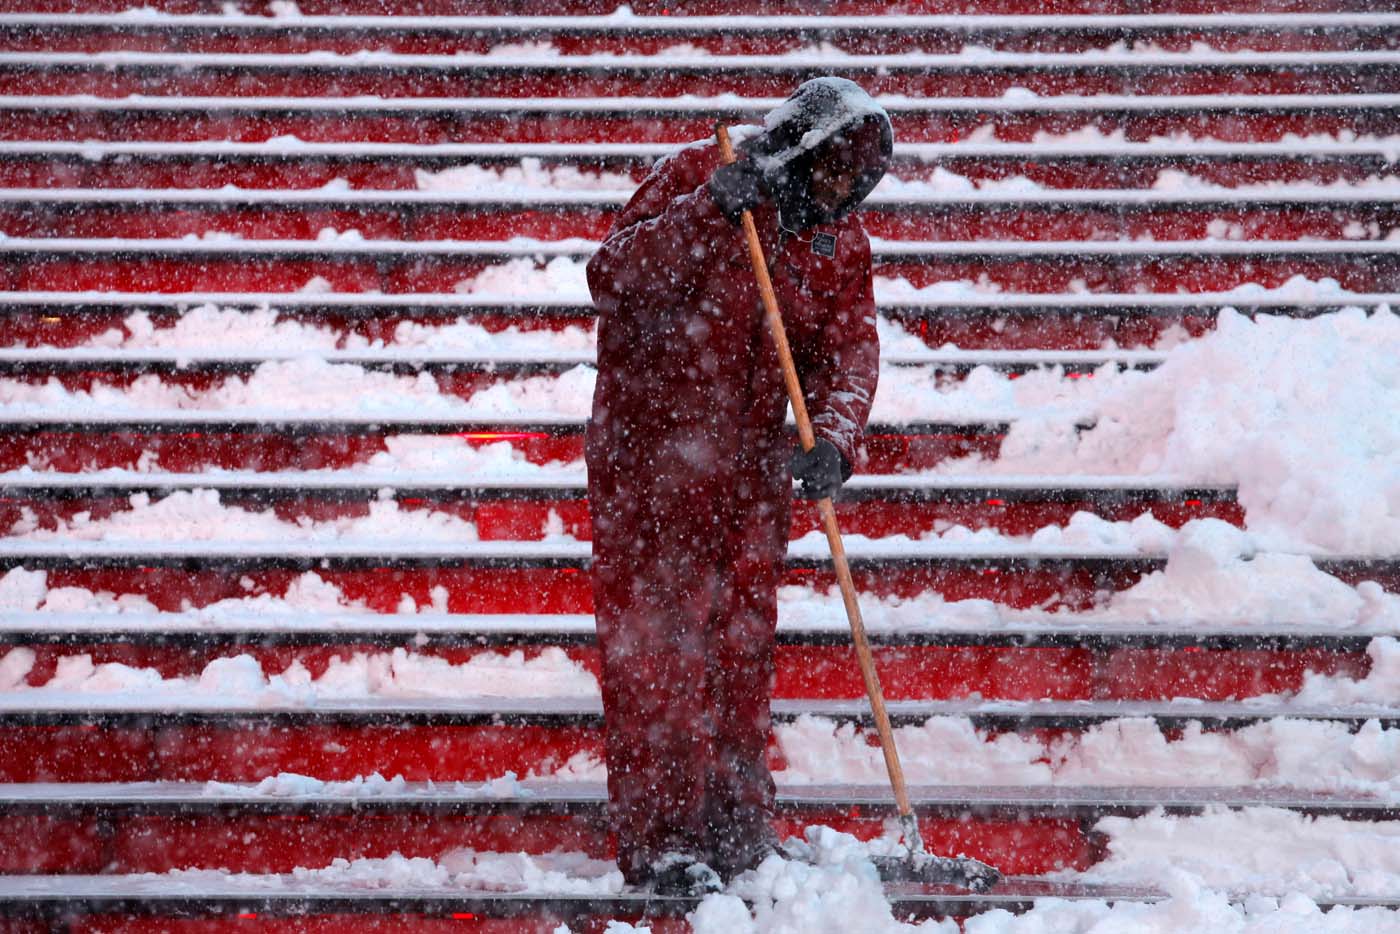 A worker attempts to clear steps in Times Square as snow falls in Manhattan, New York, U.S. February 9, 2017. REUTERS/Andrew Kelly